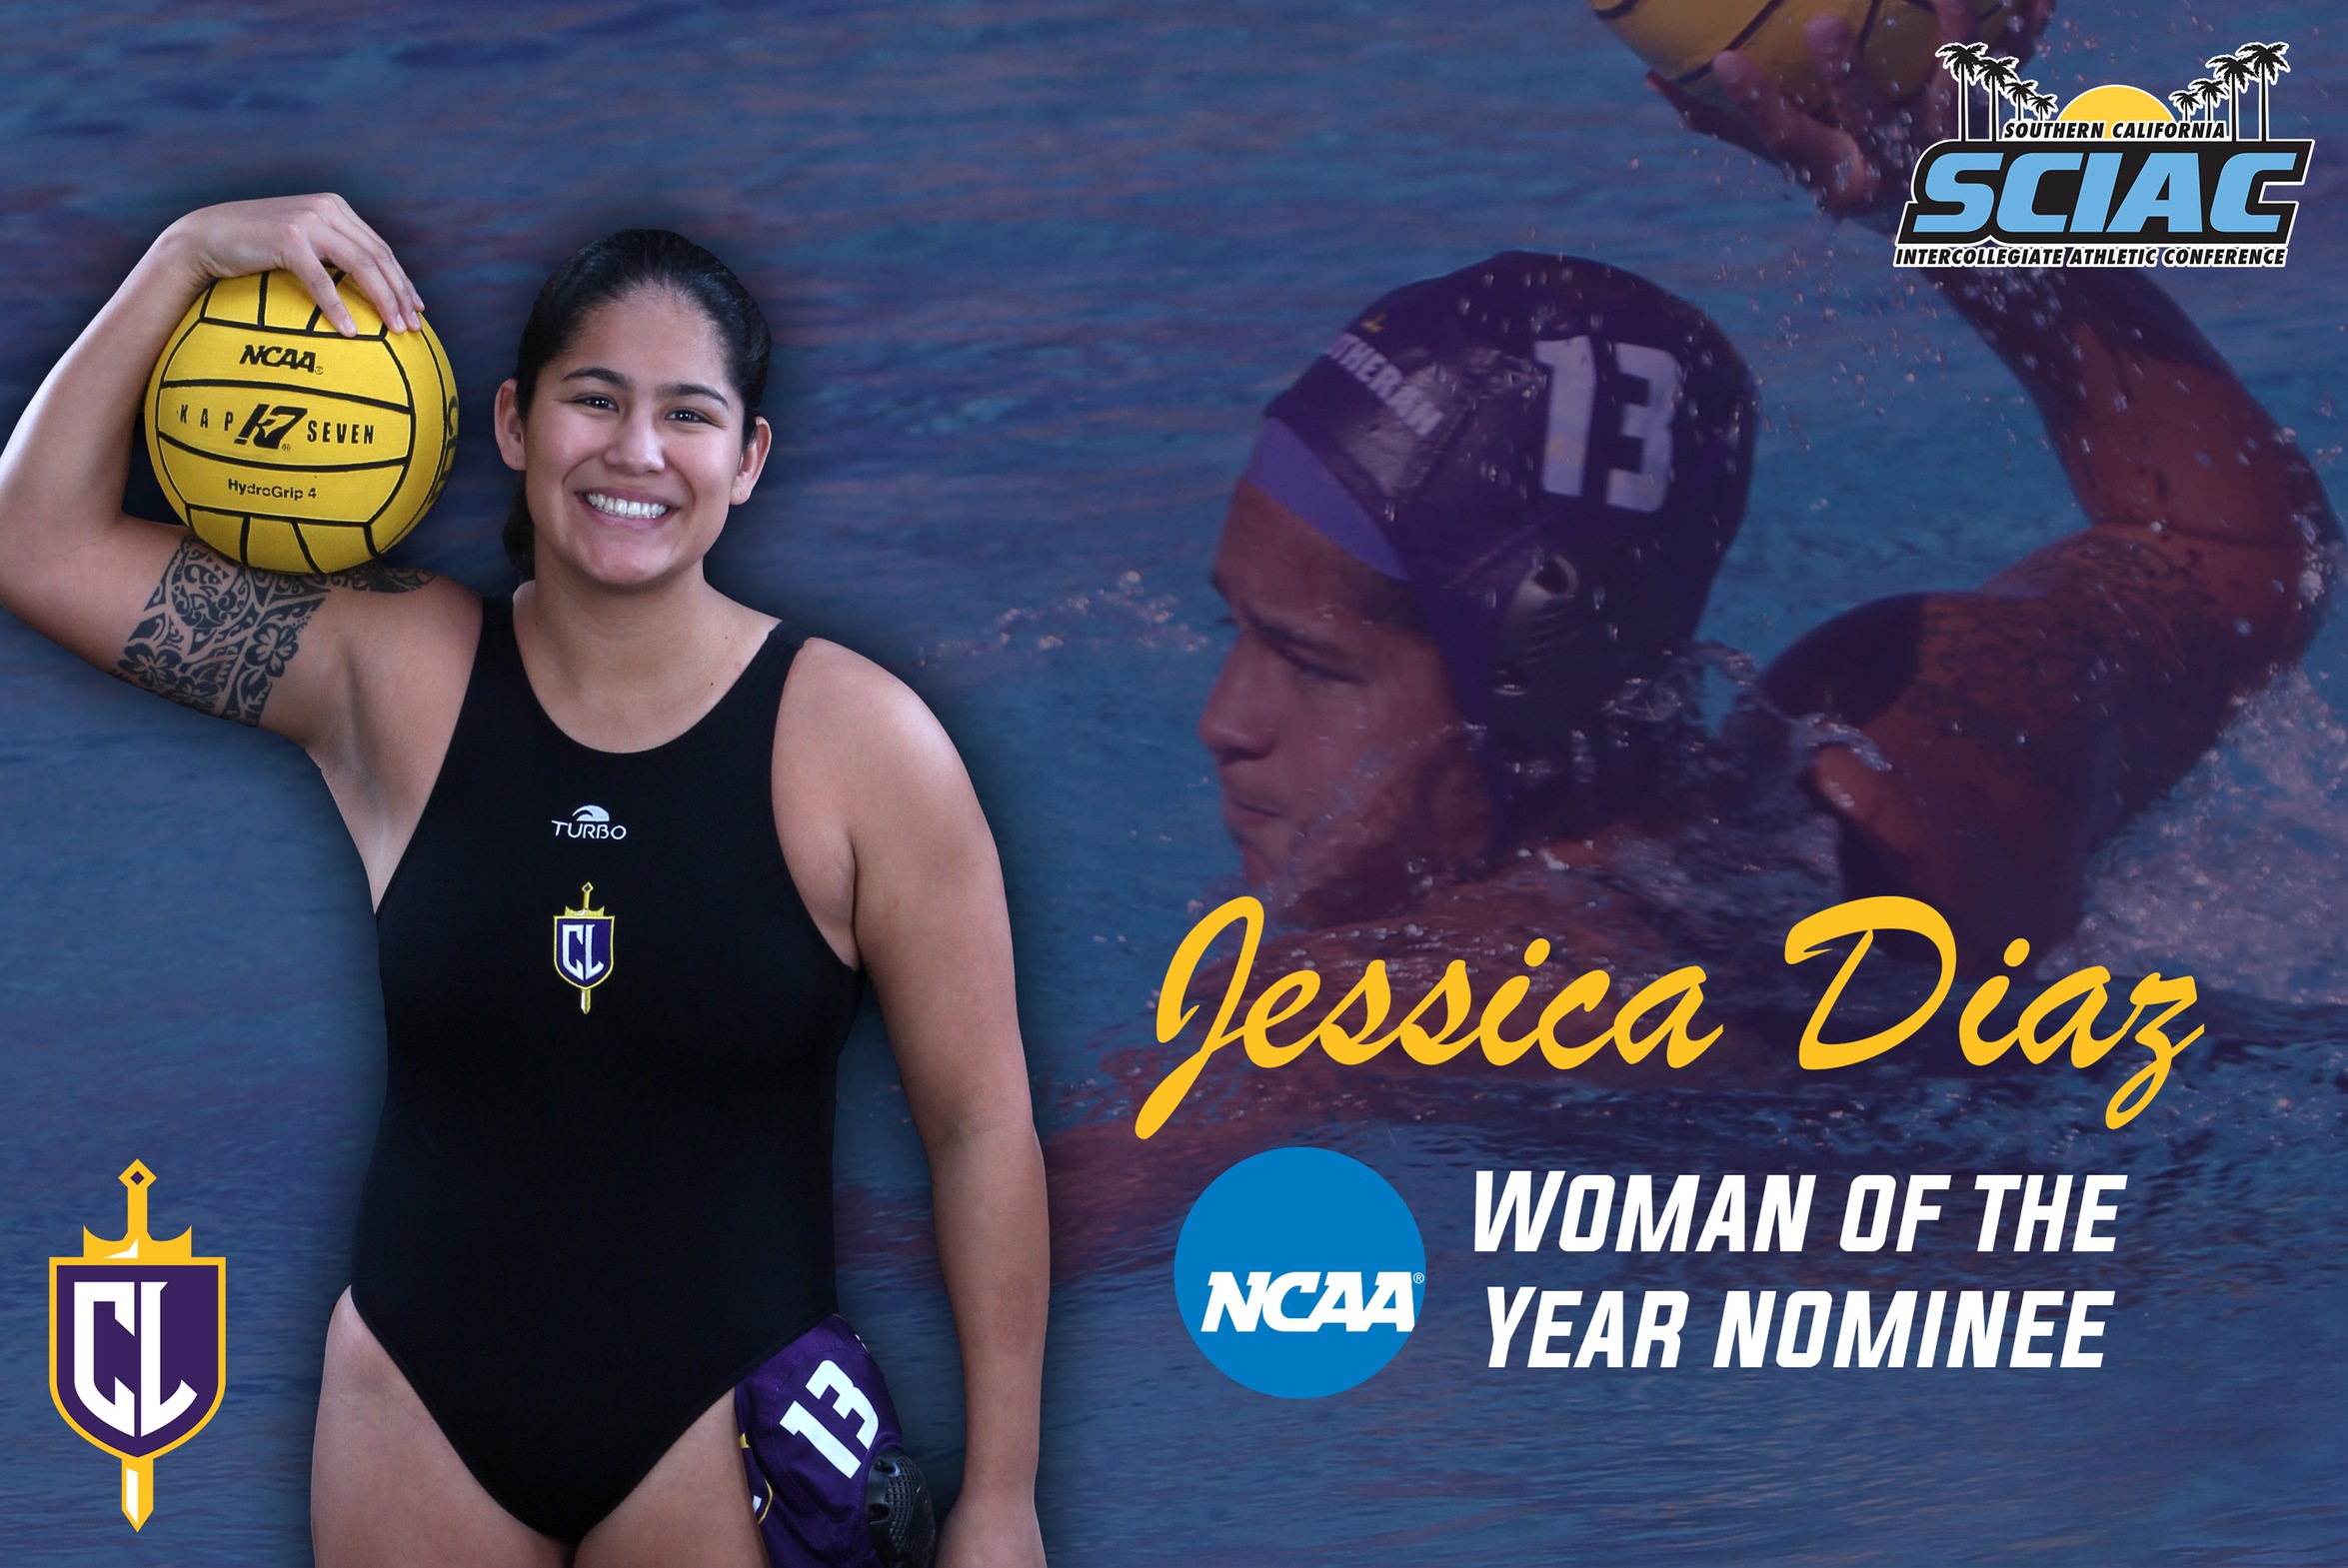 Diaz Represents SCIAC as 2021 NCAA Woman of the Year Nominee